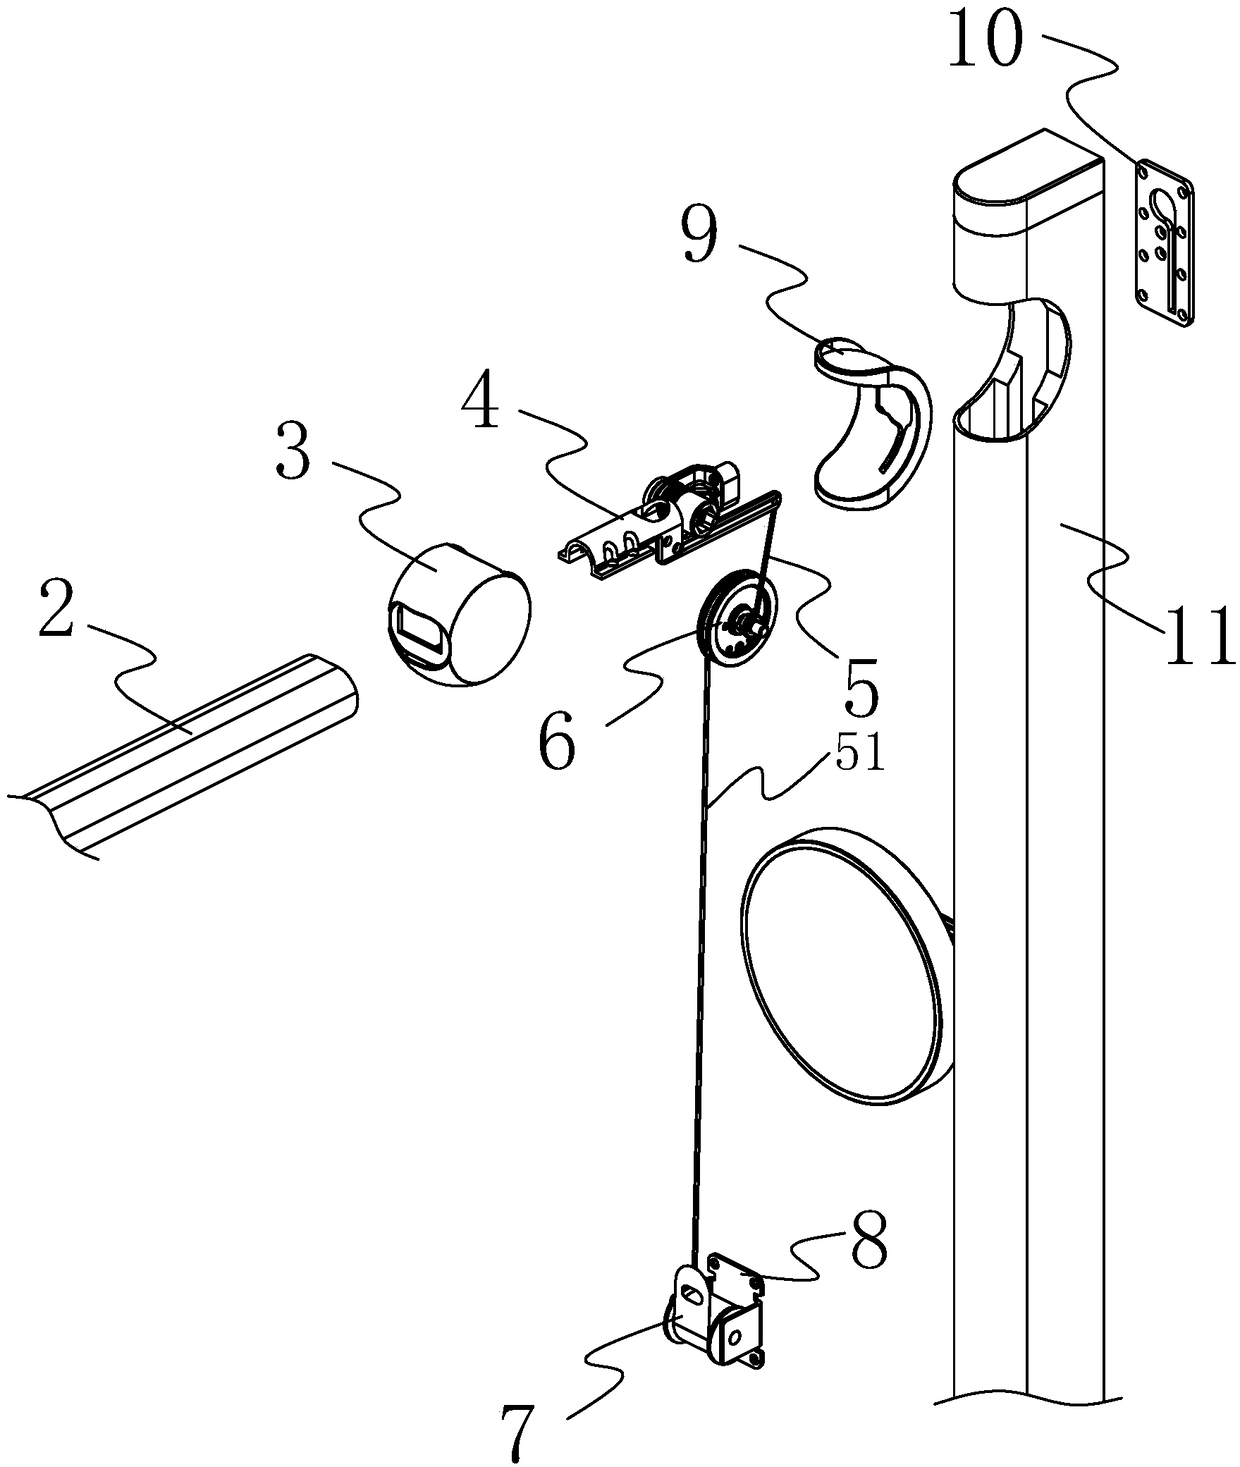 Shower with top sprinkler capable of rotating up and down